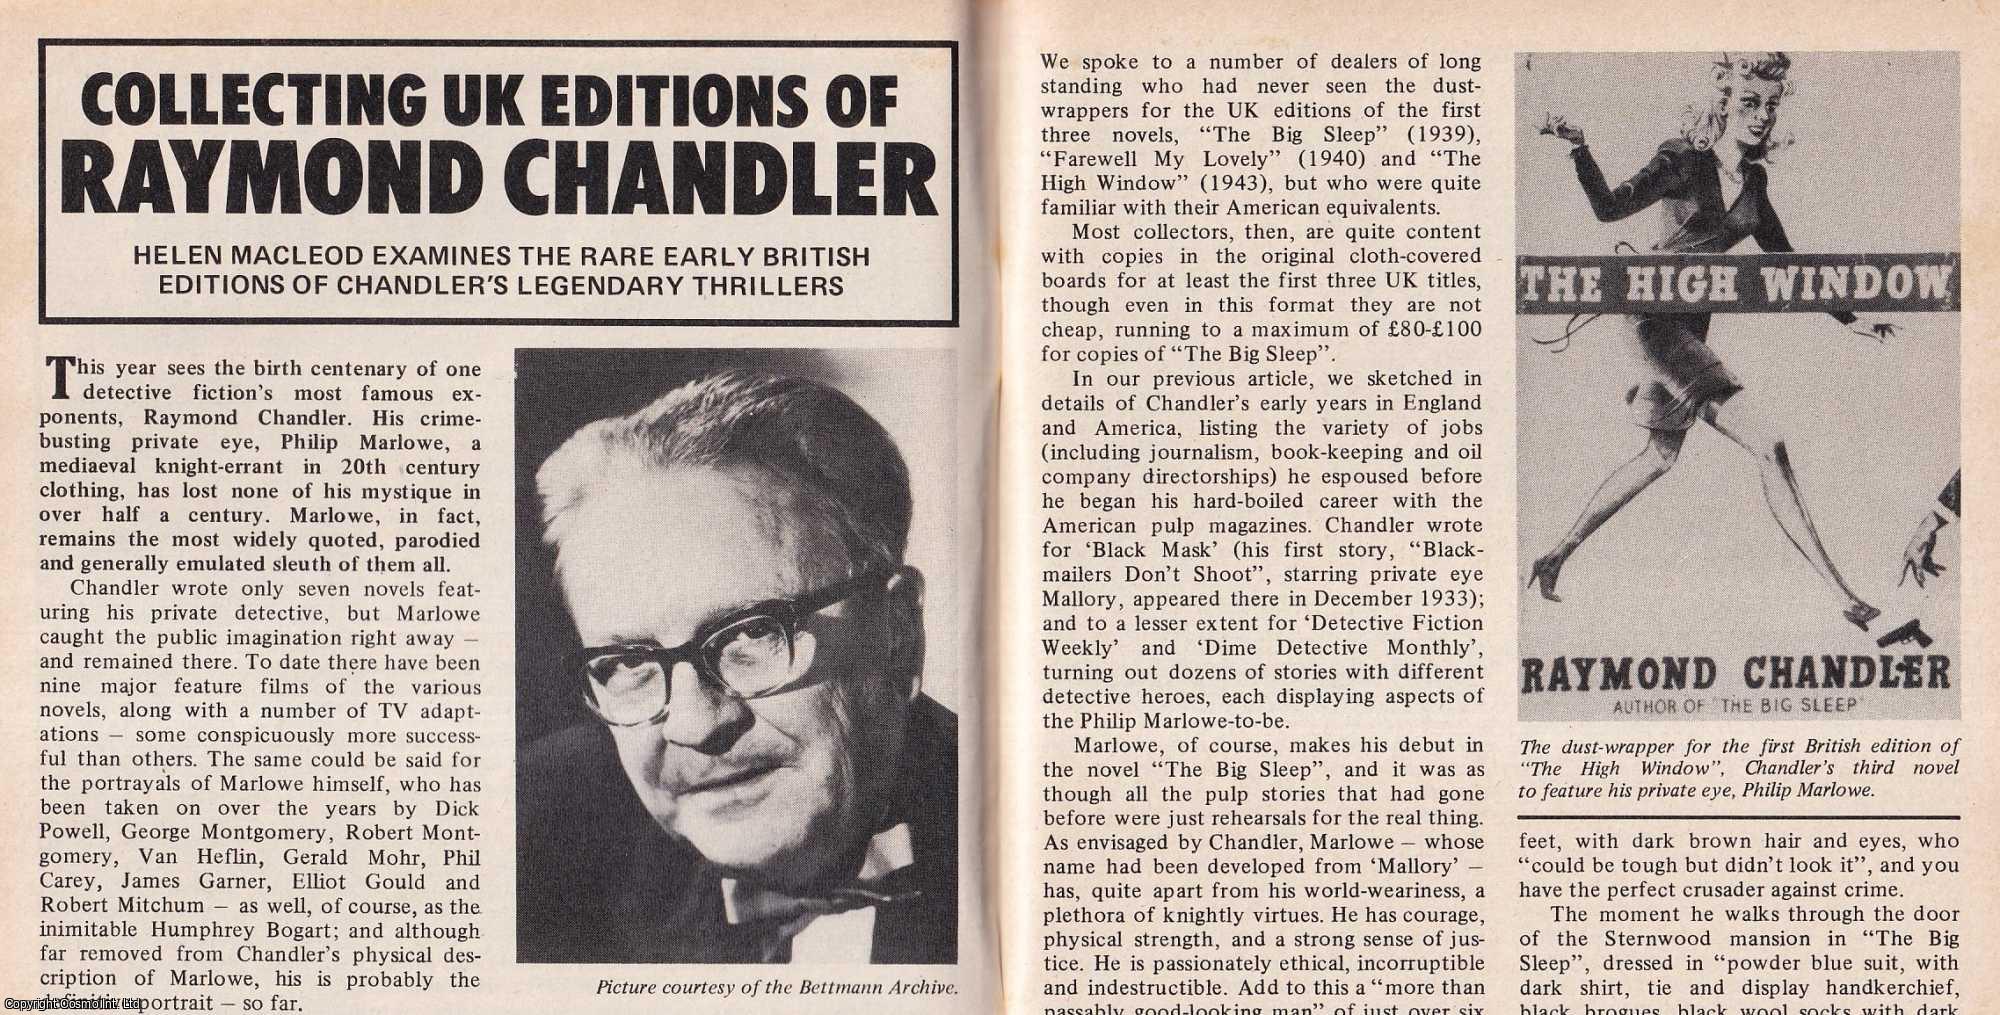 Helen Macleod - Collecting UK Editions of Raymond Chandler. Examining The Rare Early British Editions of his Legendary Thrillers. This is an original article separated from an issue of The Book & Magazine Collector publication.